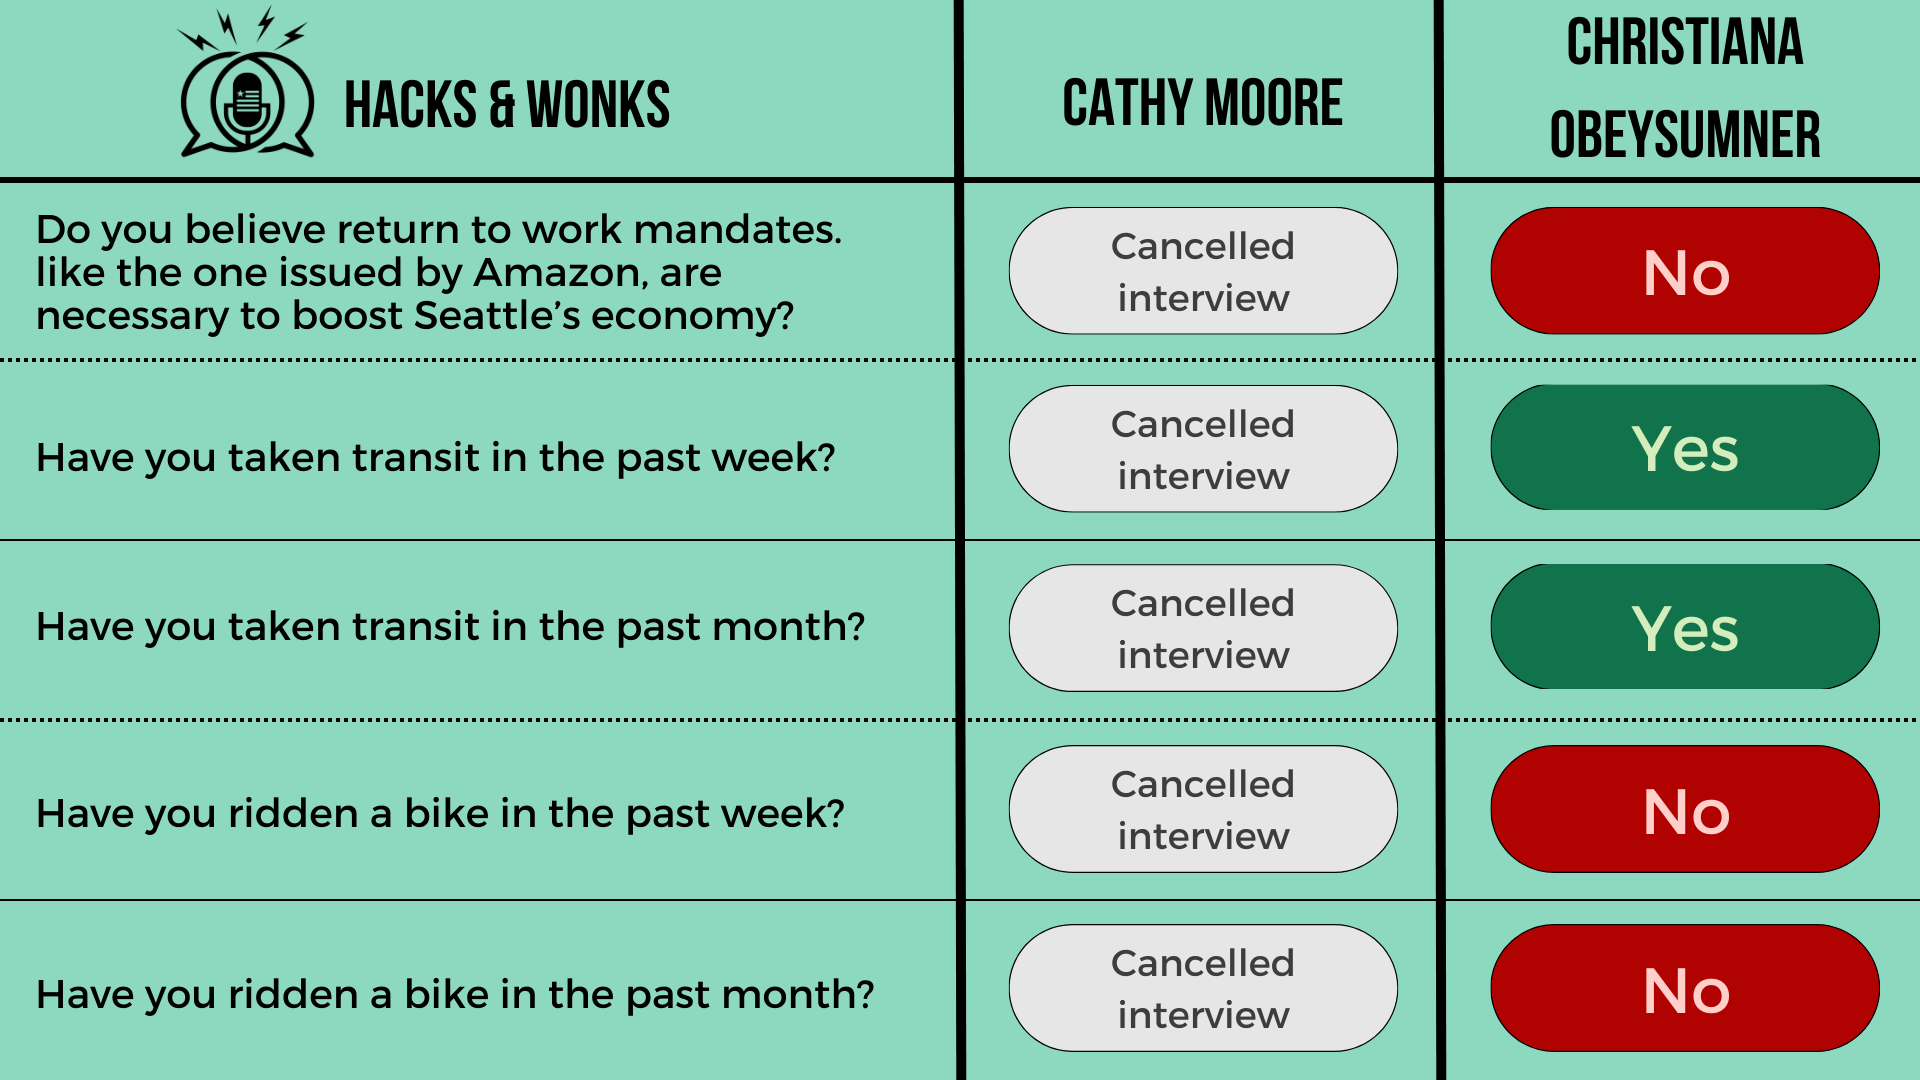 Q: Do you believe return to work mandates. like the one issued by Amazon, are necessary to boost Seattle’s economy? Cathy Moore: Cancelled interview, ChrisTiana ObeySumner: No  Q: Have you taken transit in the past week? Cathy Moore: Cancelled interv